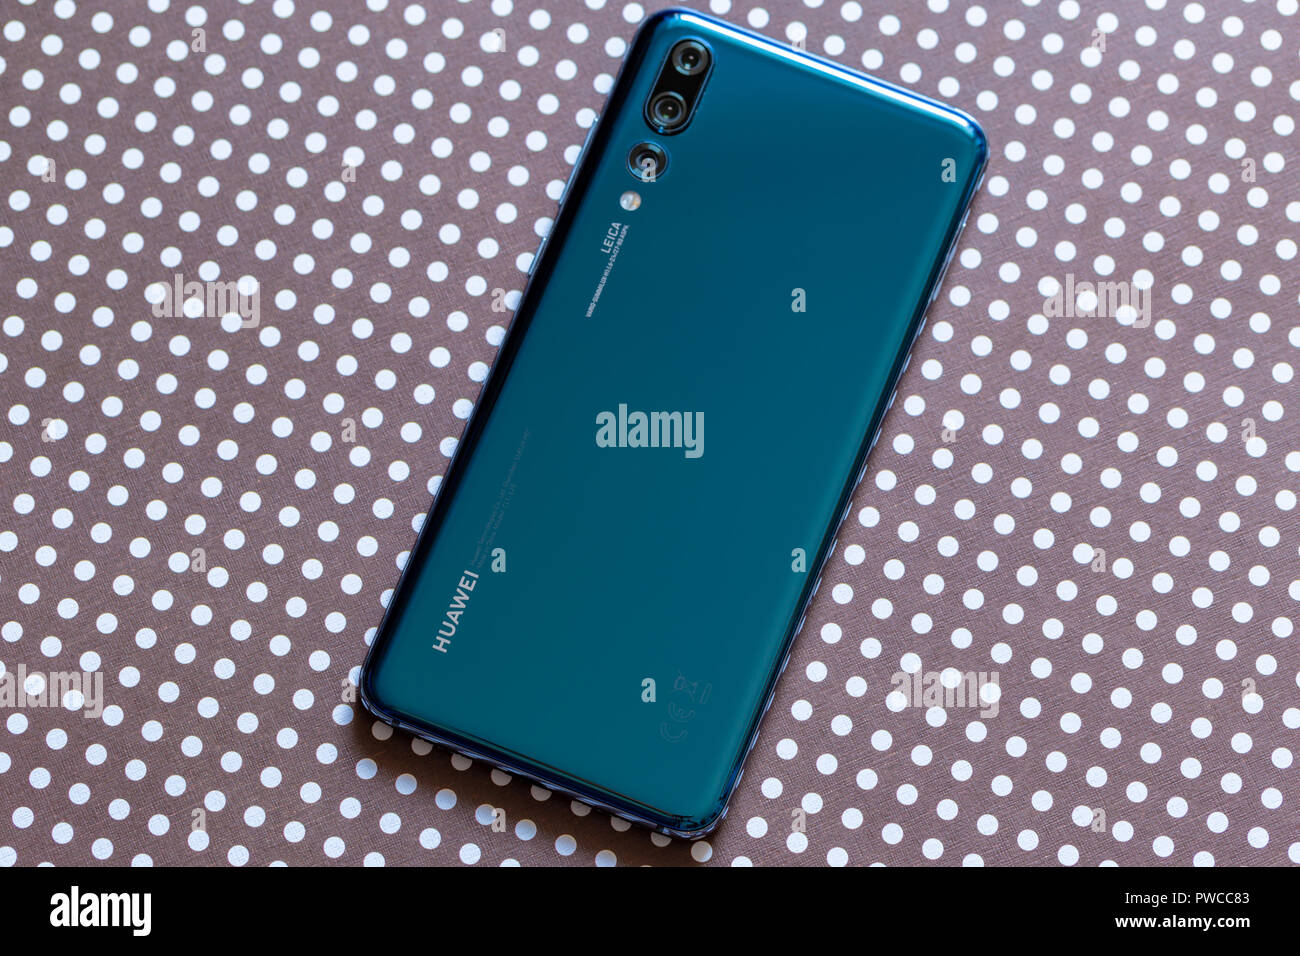 Warsaw, Poland - October 07,2018: Smartphone Huawei P20 Pro in blue colour. Stock Photo